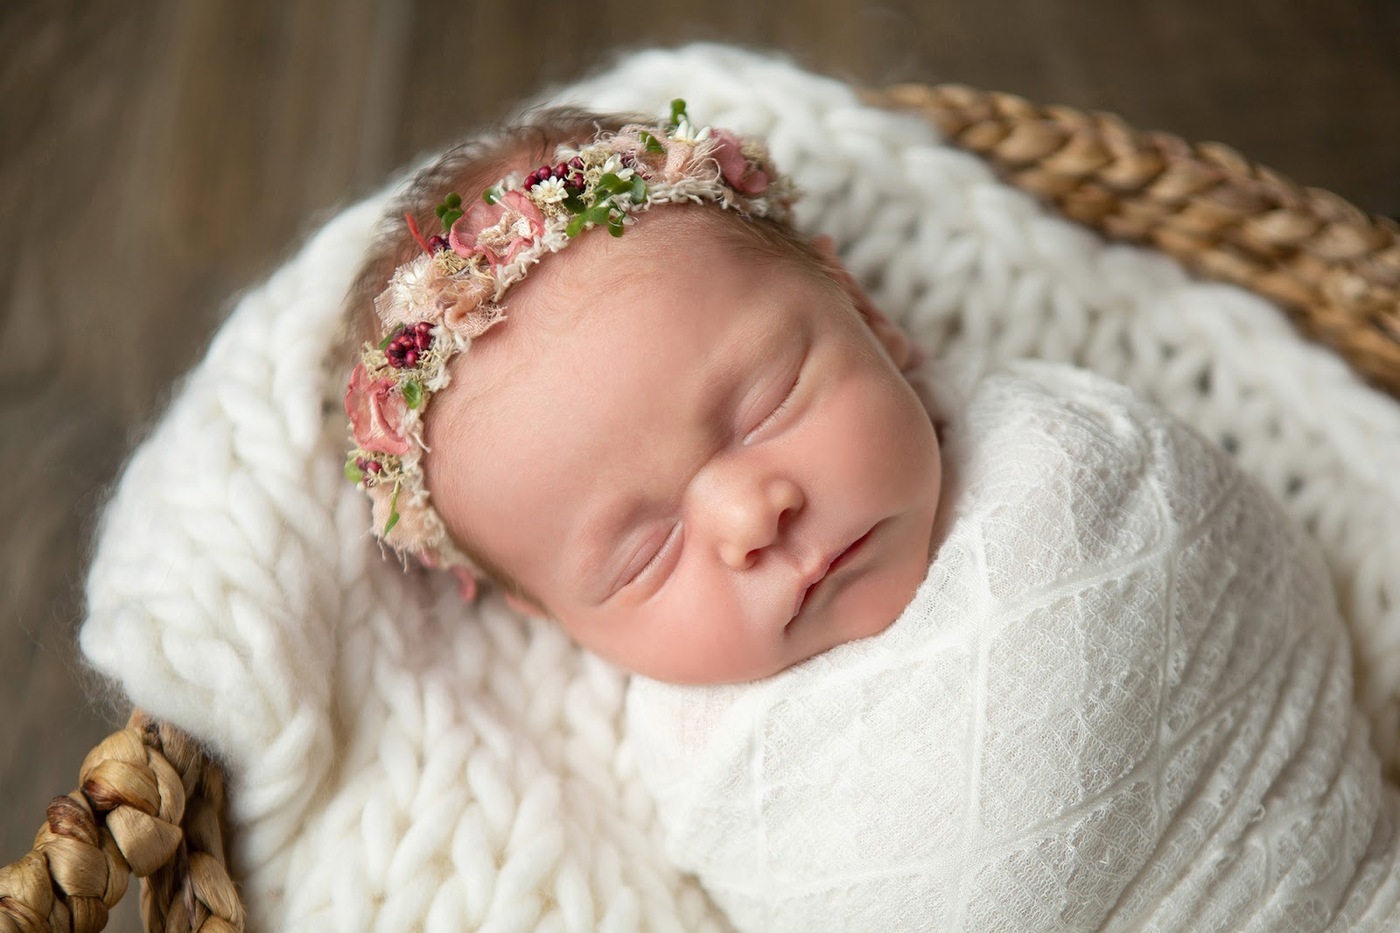 Jenn Brookover is a professional photographer with over 18 years of experience. She has photographed thousands of newborns throughout South Texas.